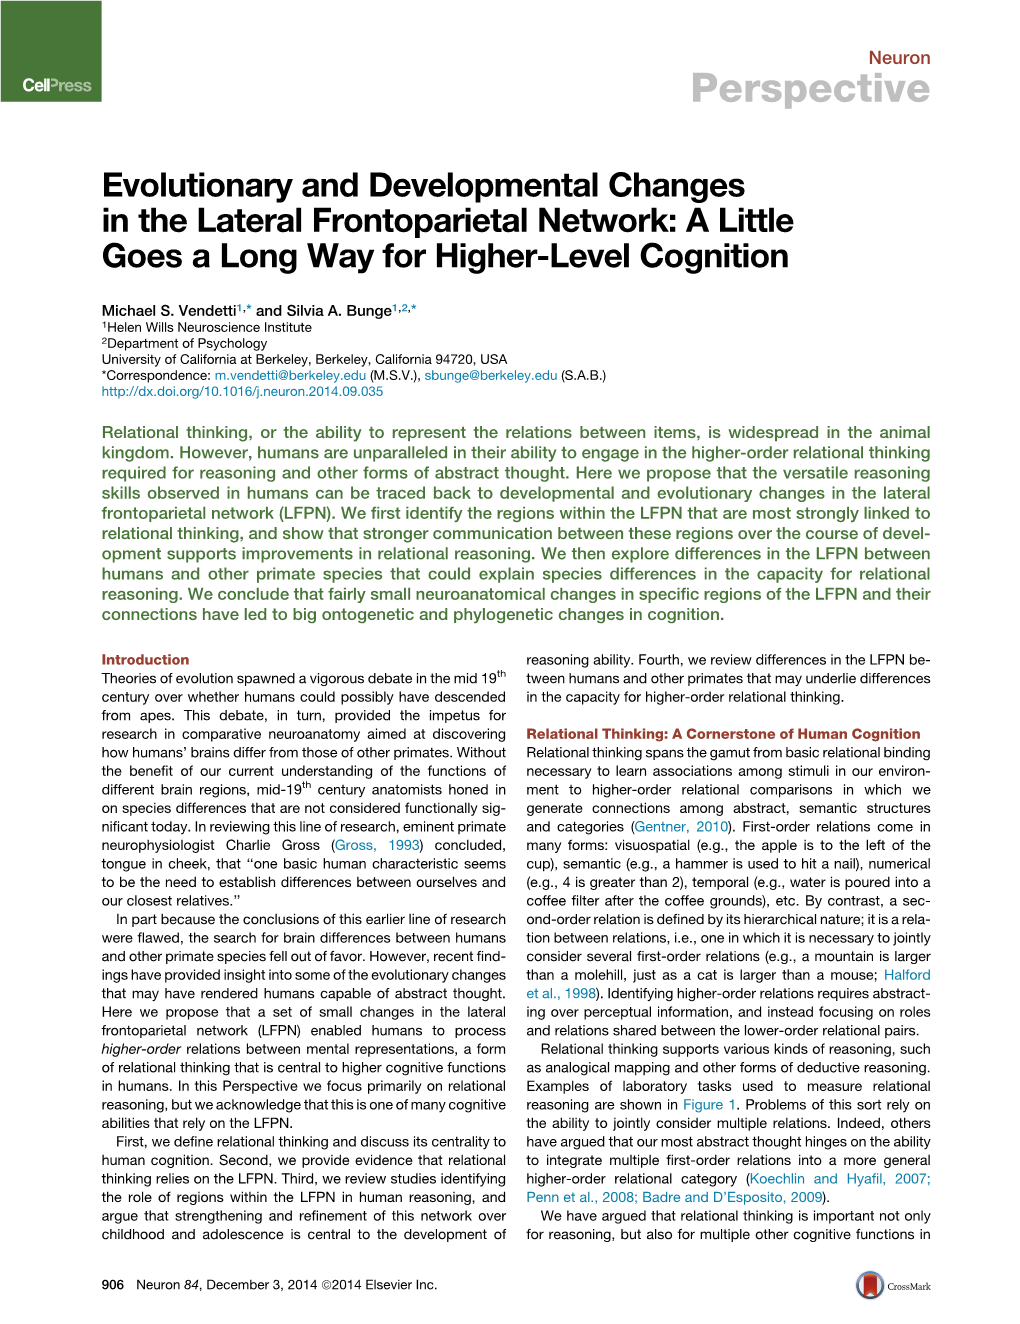 Evolutionary and Developmental Changes in the Lateral Frontoparietal Network: a Little Goes a Long Way for Higher-Level Cognition